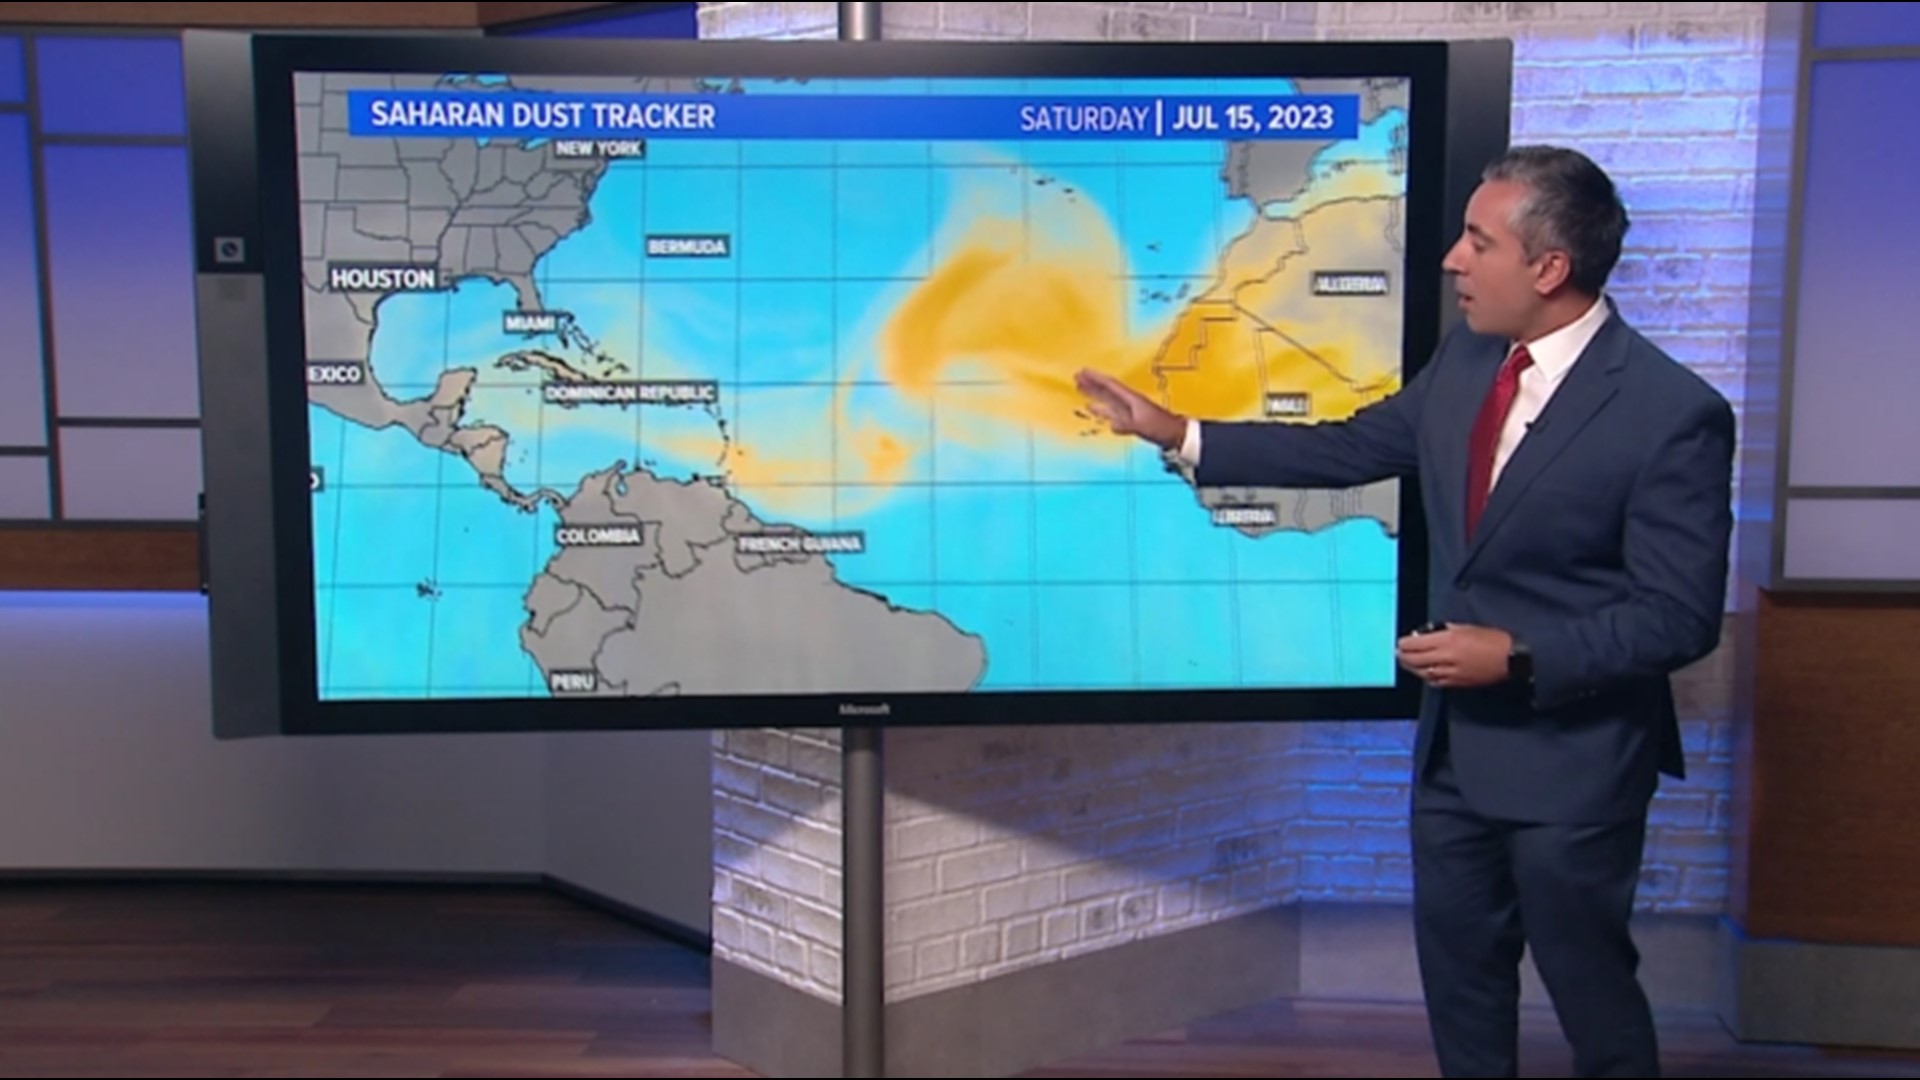 Saharan dust is a bit of bad news for those with respiratory issues. But the good news is that Saharan dust keeps tropical development in check.